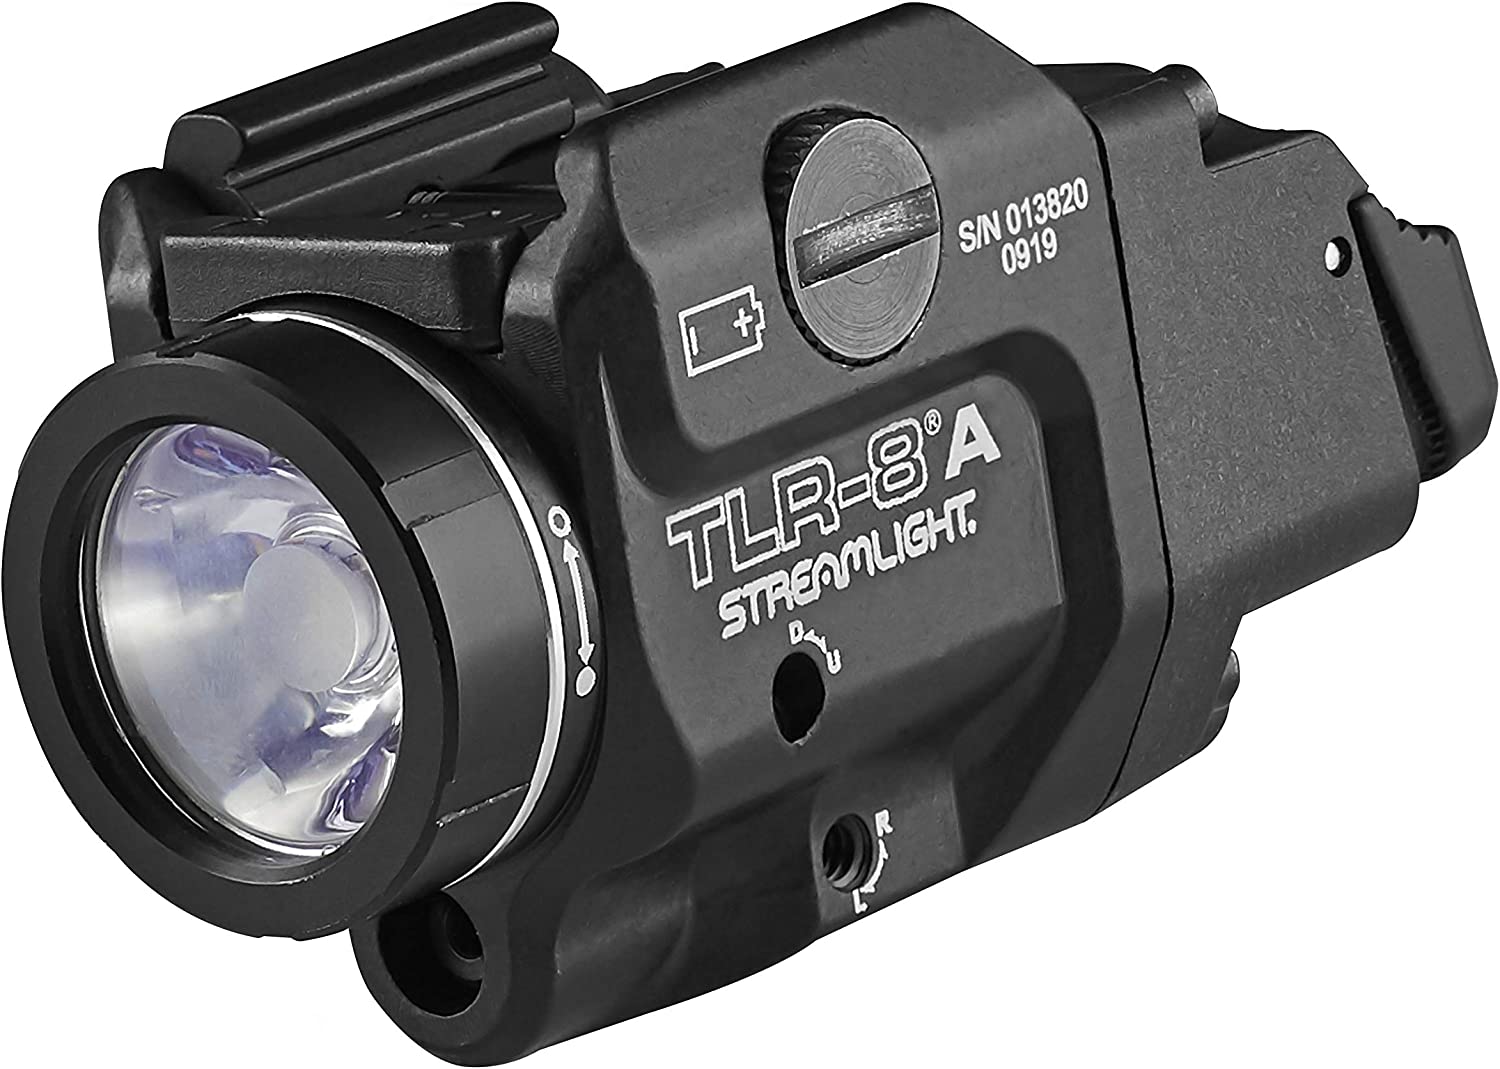 Streamlight 69414 TLR-8A Flex 500-Lumen Low Profile Pistol Light with Integrated Red Laser for Select Handguns, Includes Rear Switch Options, Mounting Kit, and Keys, Black